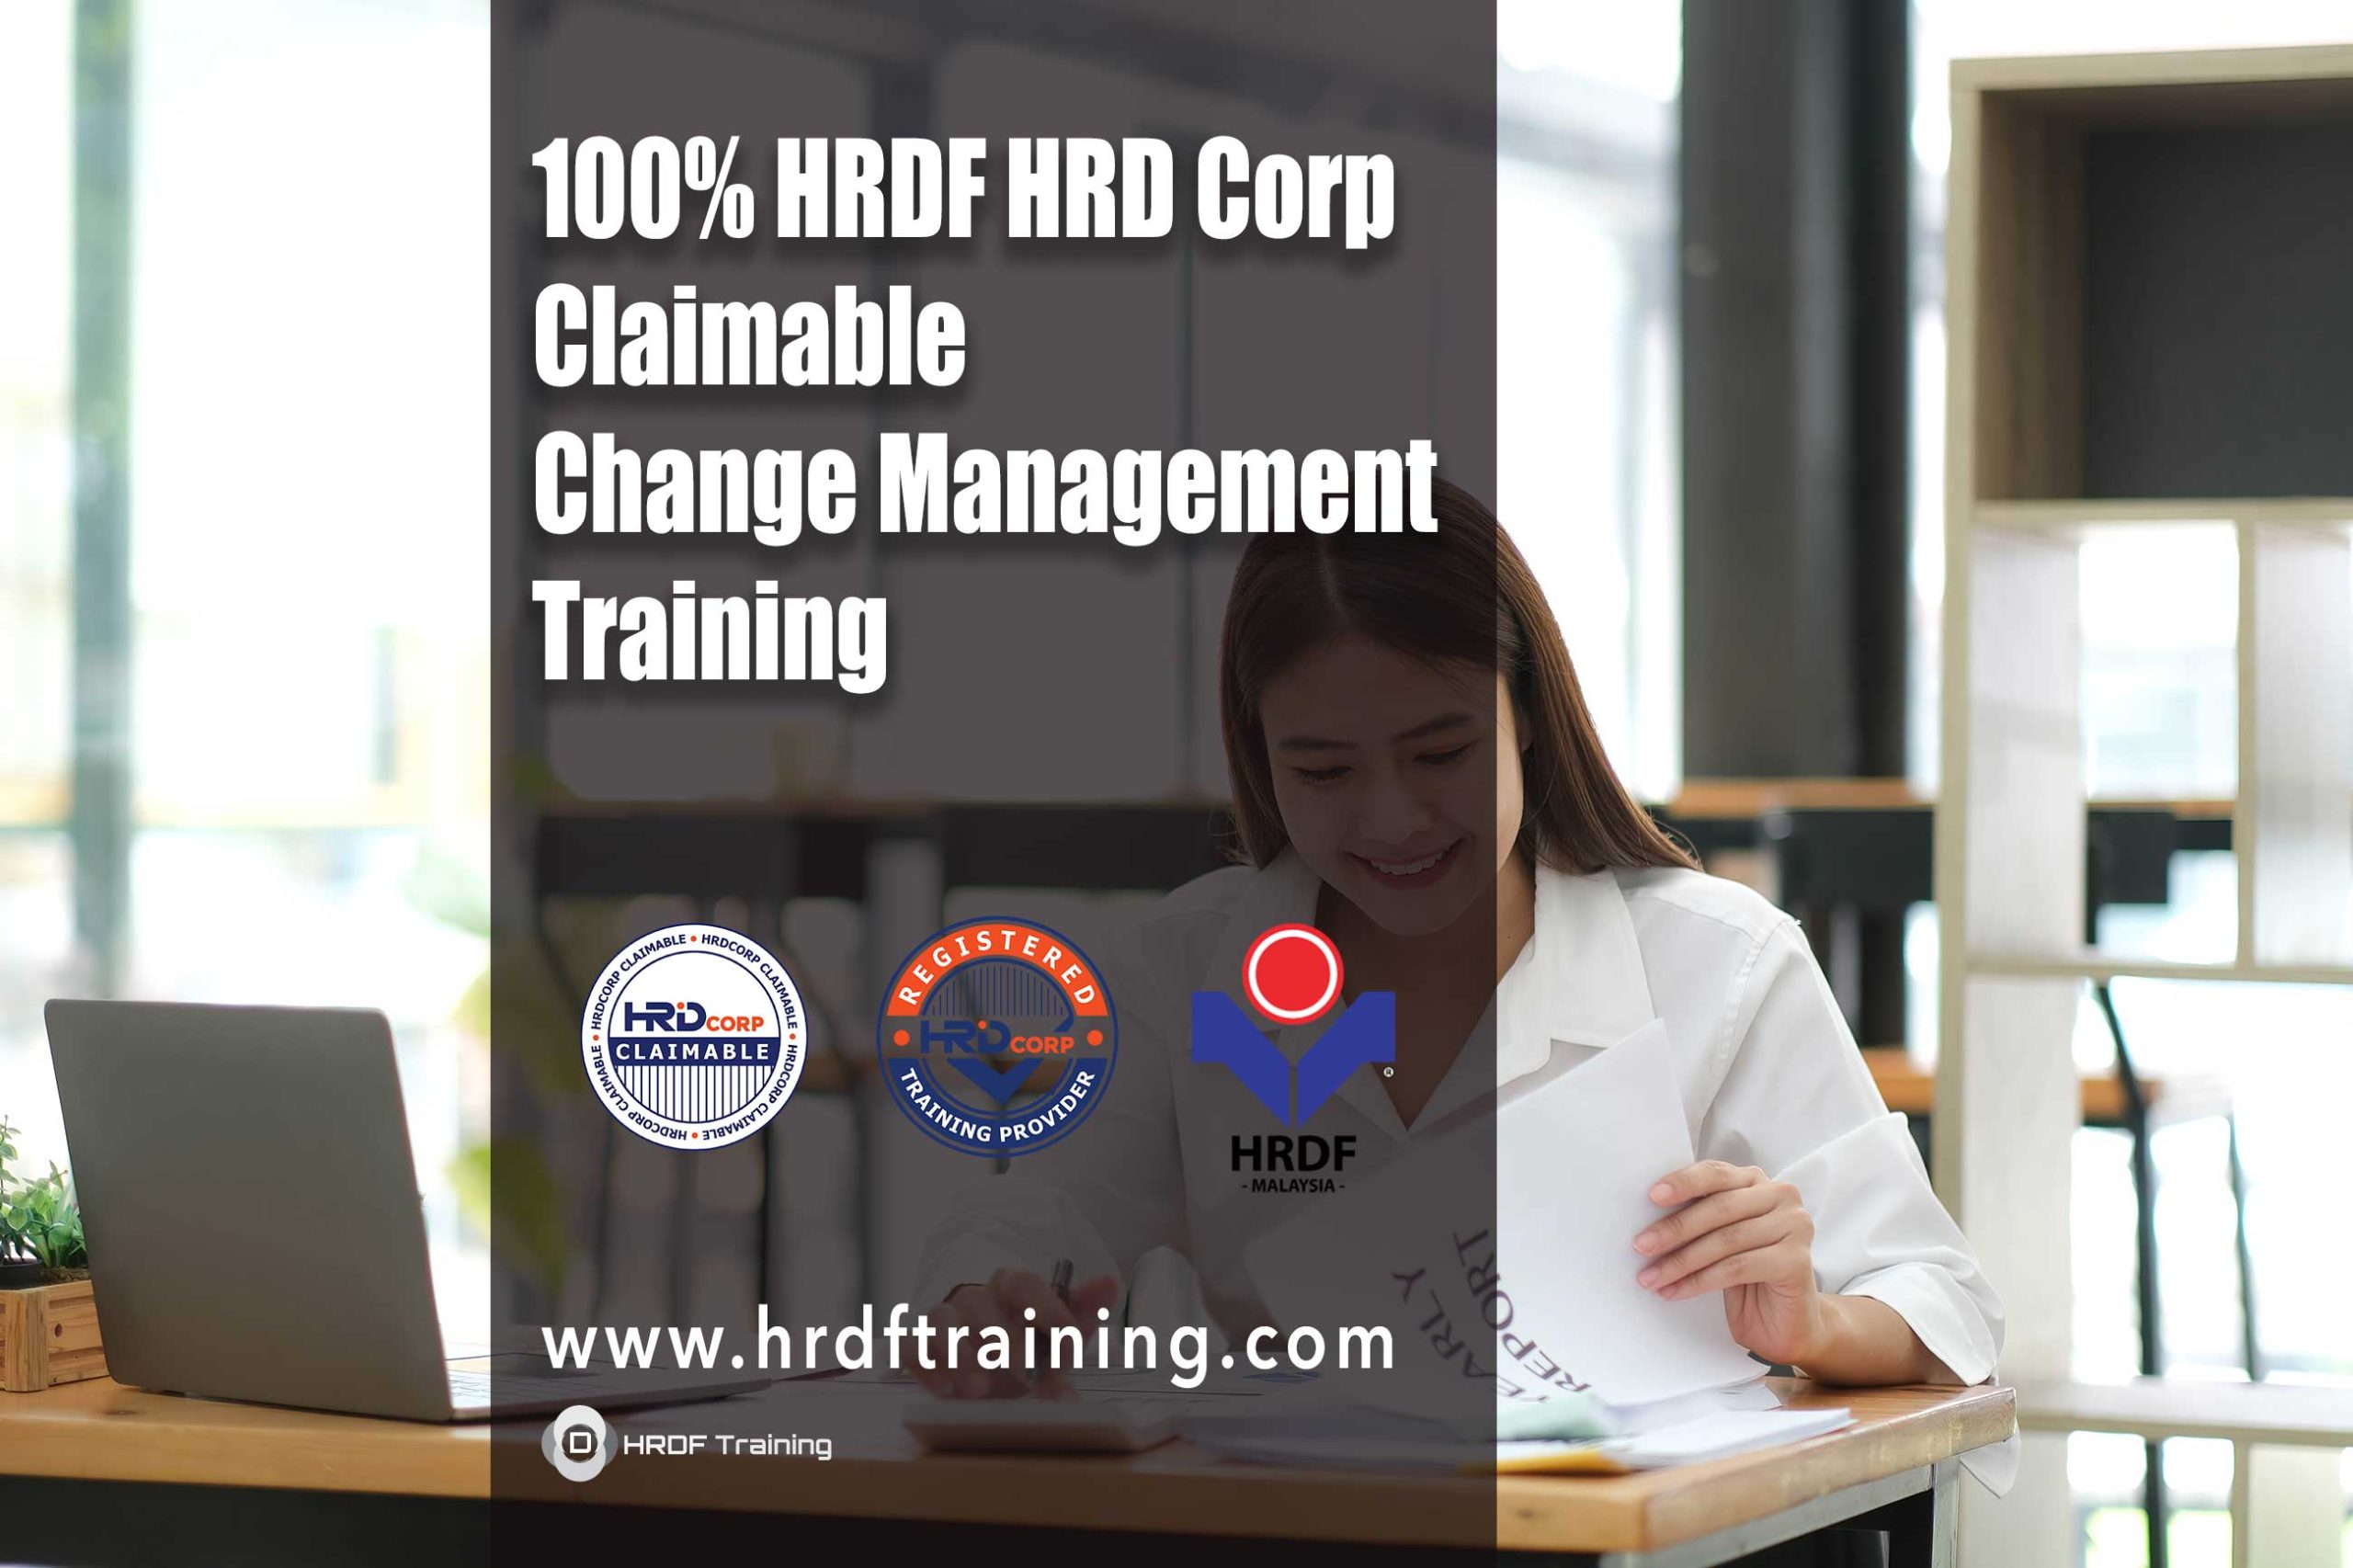 HRDF-HRD-Corp-Claimable-Change-Management-Training